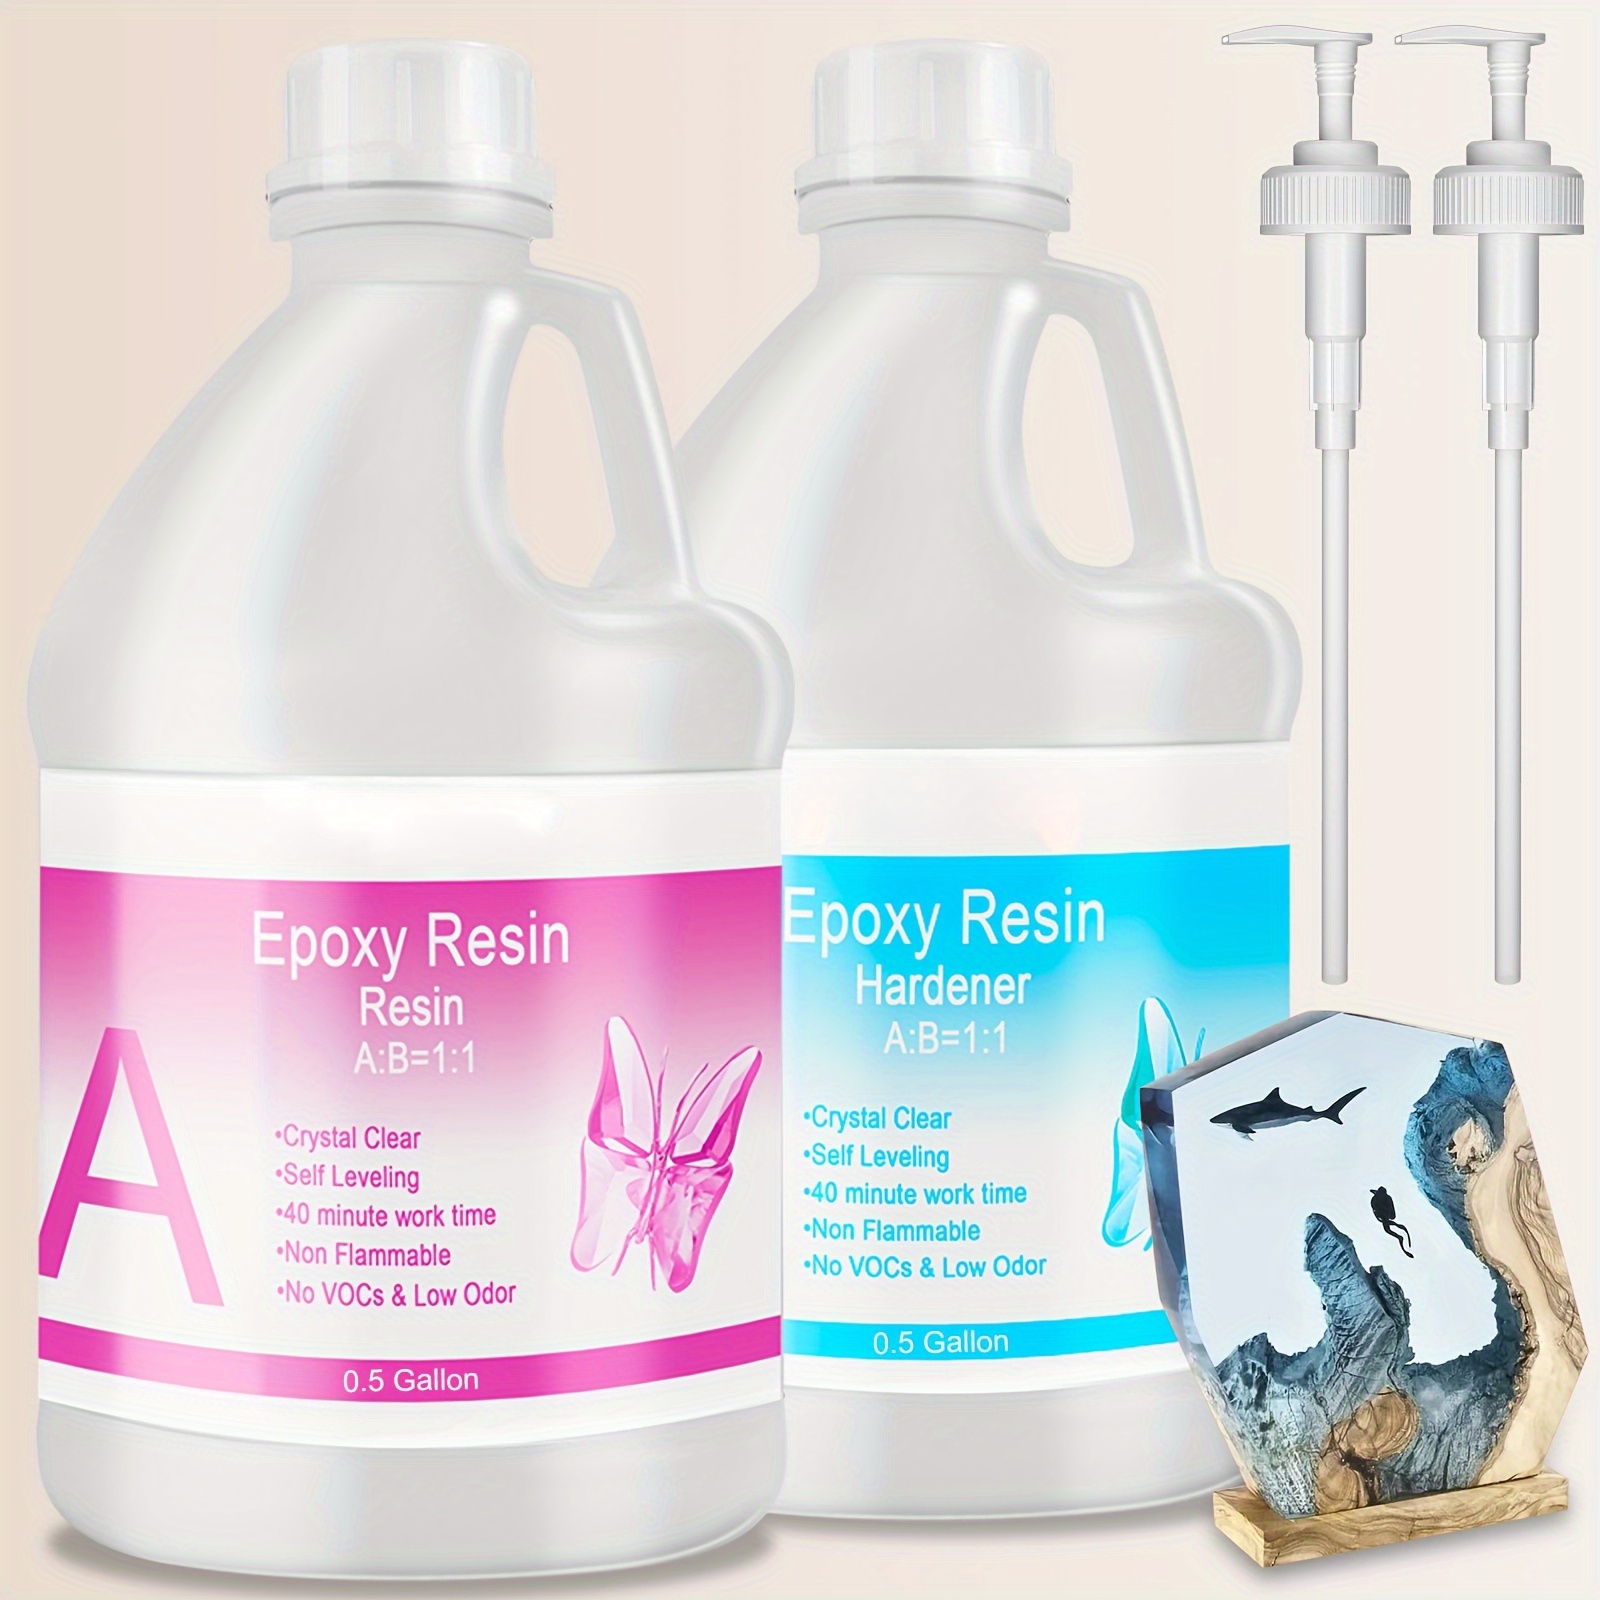 

Epoxy Resin Crystal 1 Gallon With Pump Set For Coating, Casting, Resin Art, Jewelry, Tabletop, Bar Top, Live Edge Tables, Fast Curing 2 Part Epoxy Casting Resin Set